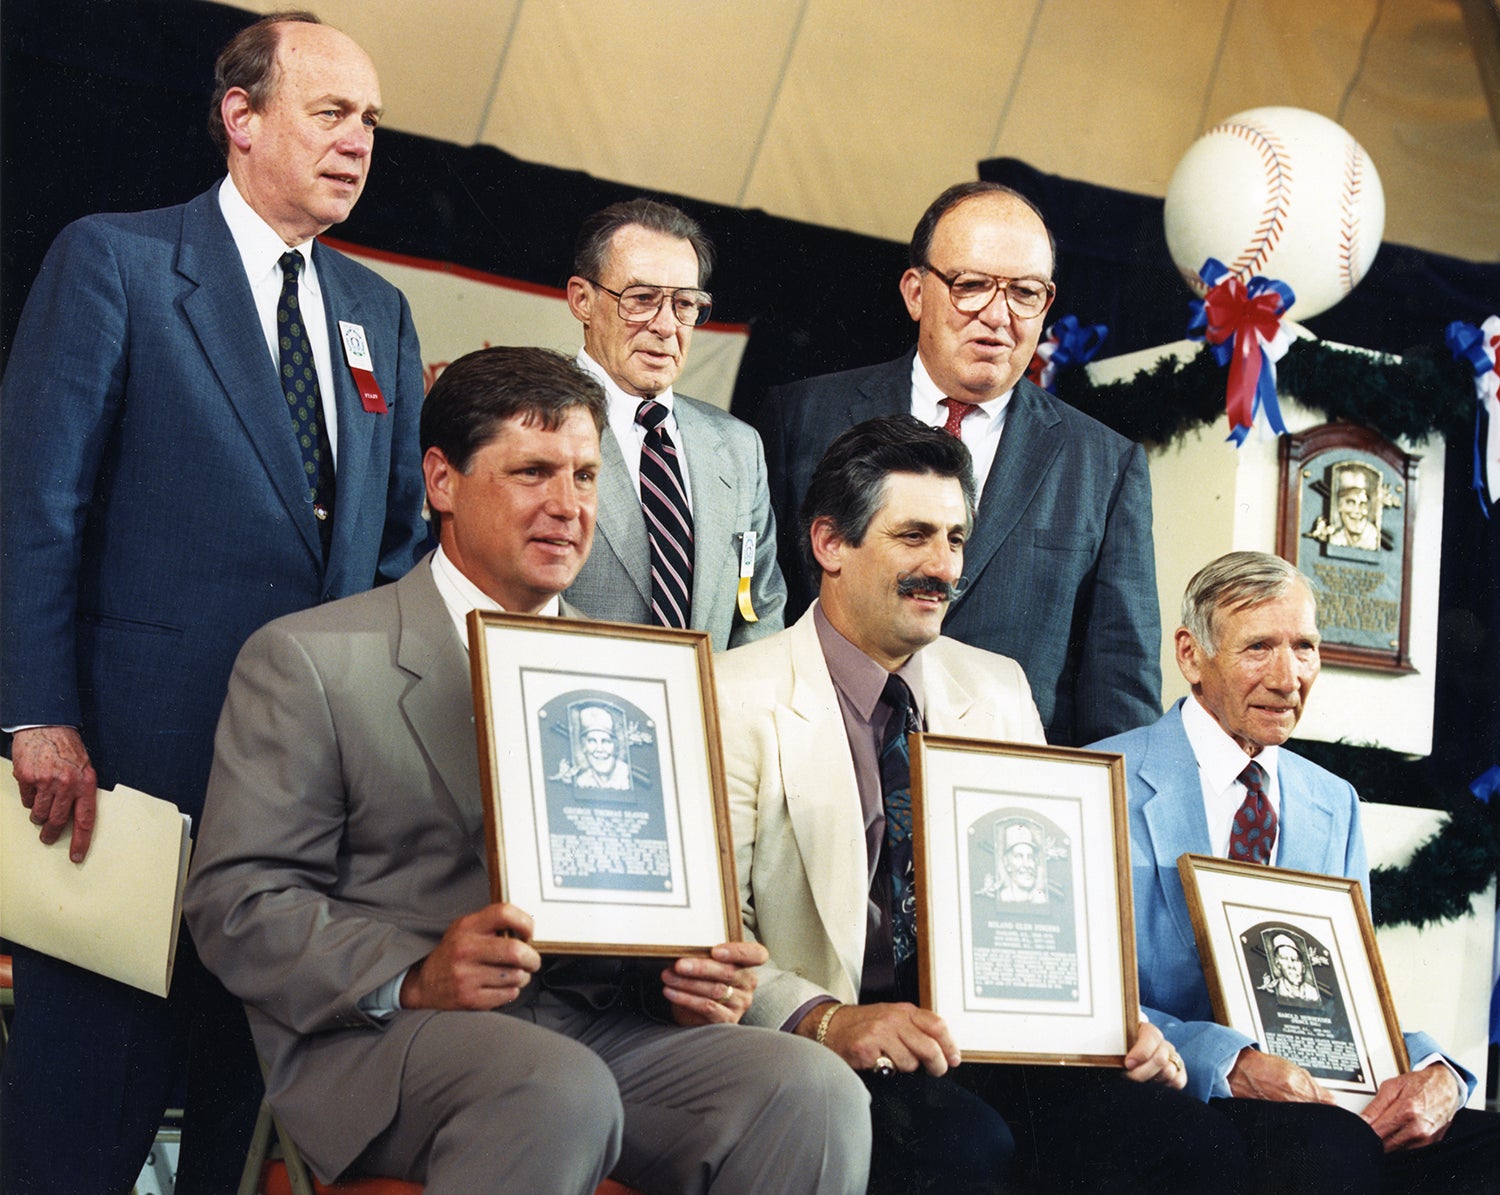 Fingers, McGowan, Newhouser and Seaver are inducted into the Hall of Fame